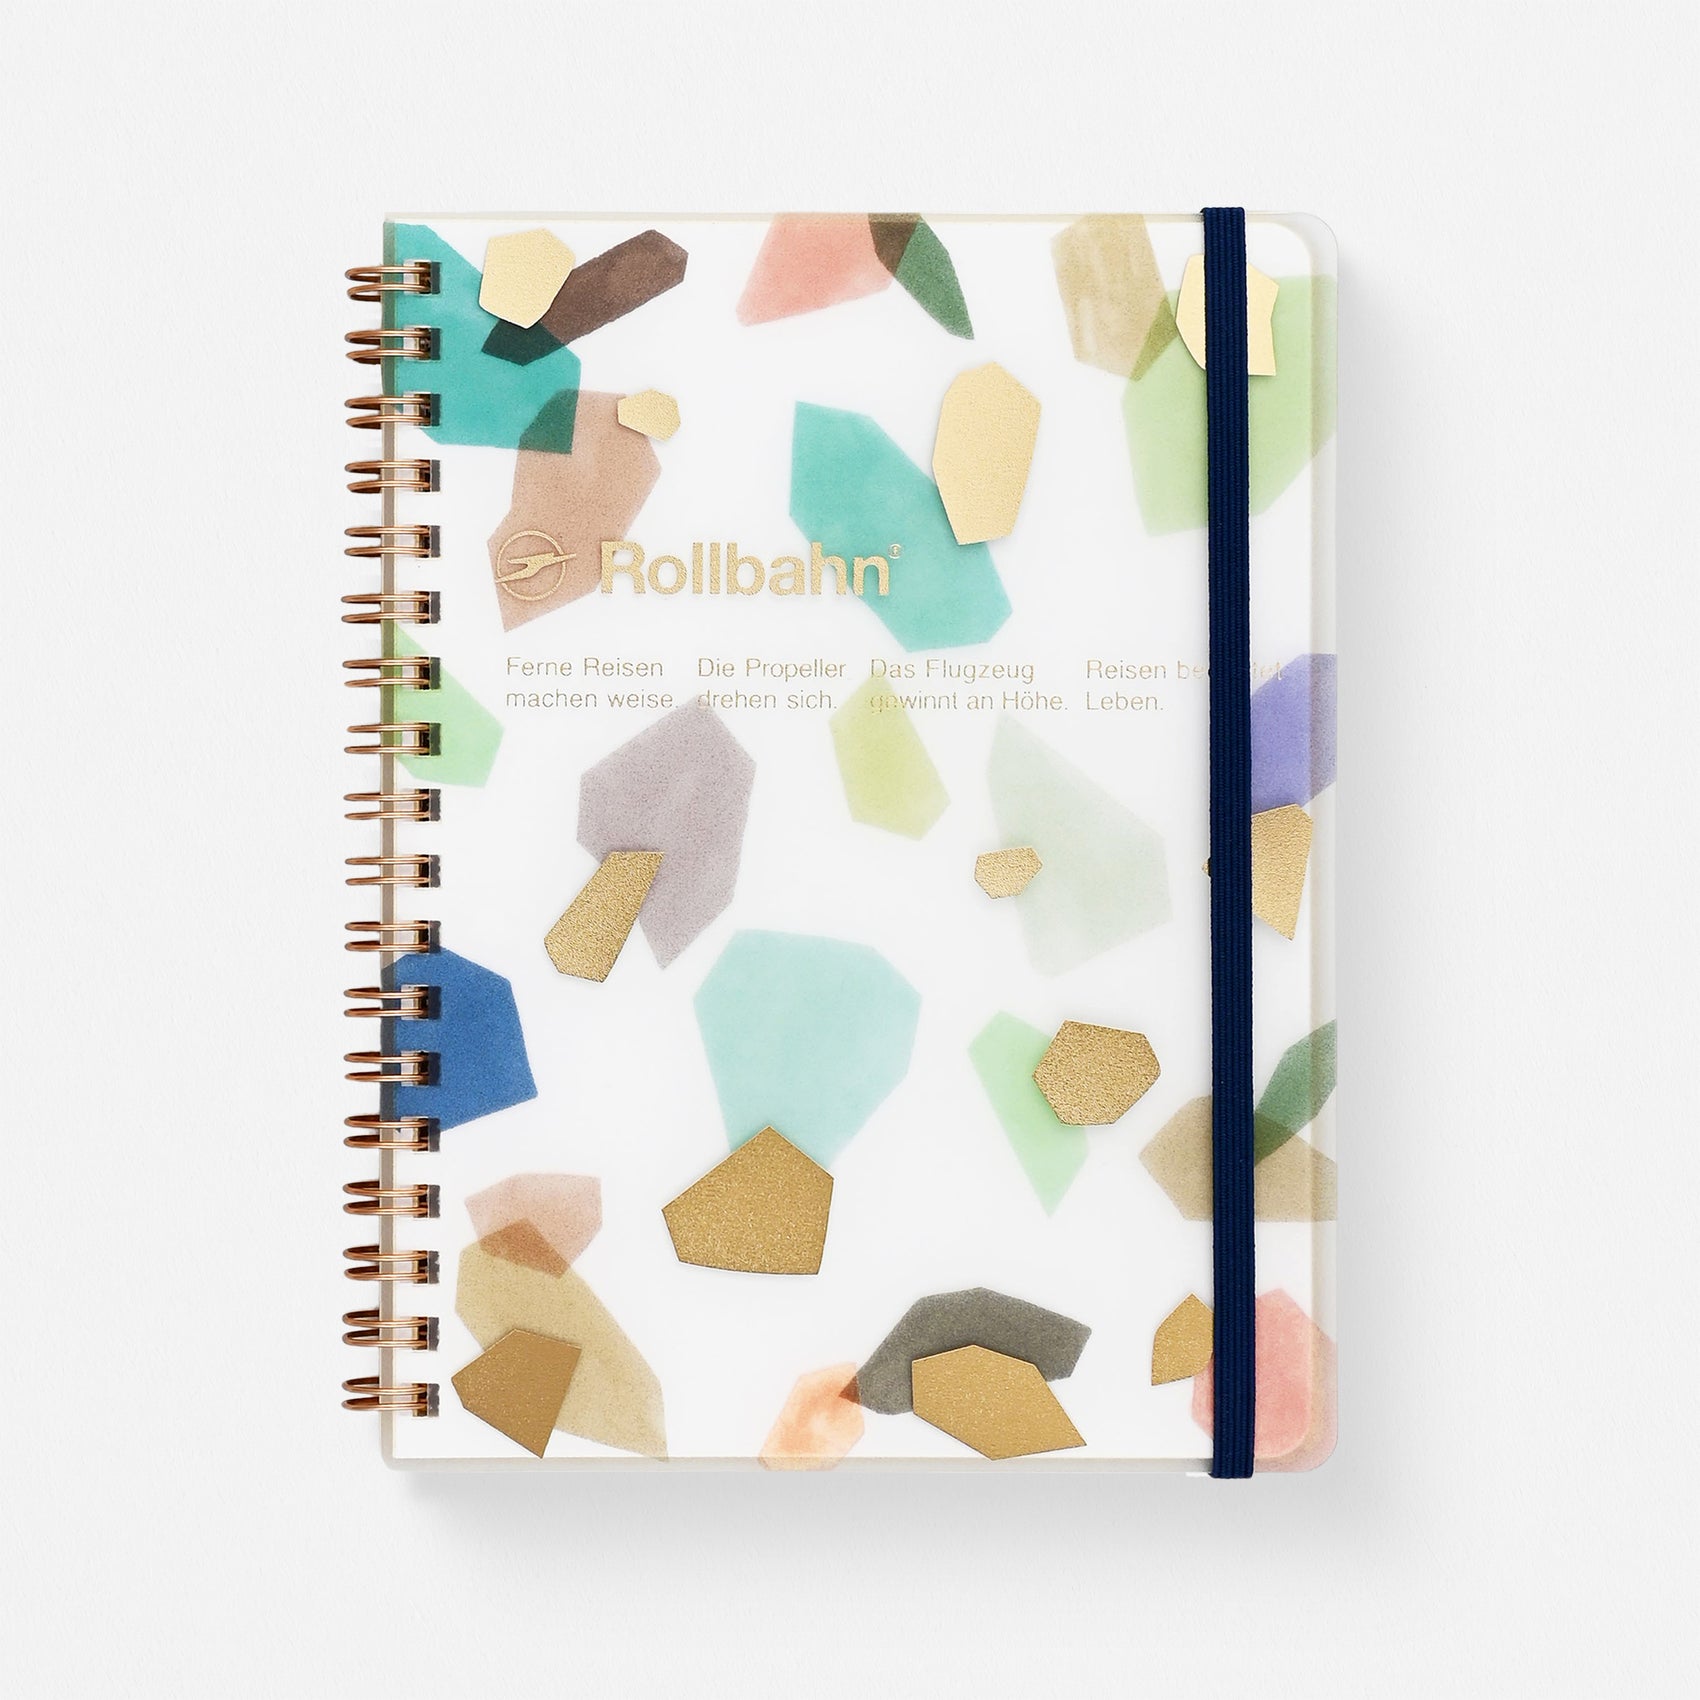 Delfonics Rollbahn Notebook Sea Glass | Mini Memo, Small, Or Large Large